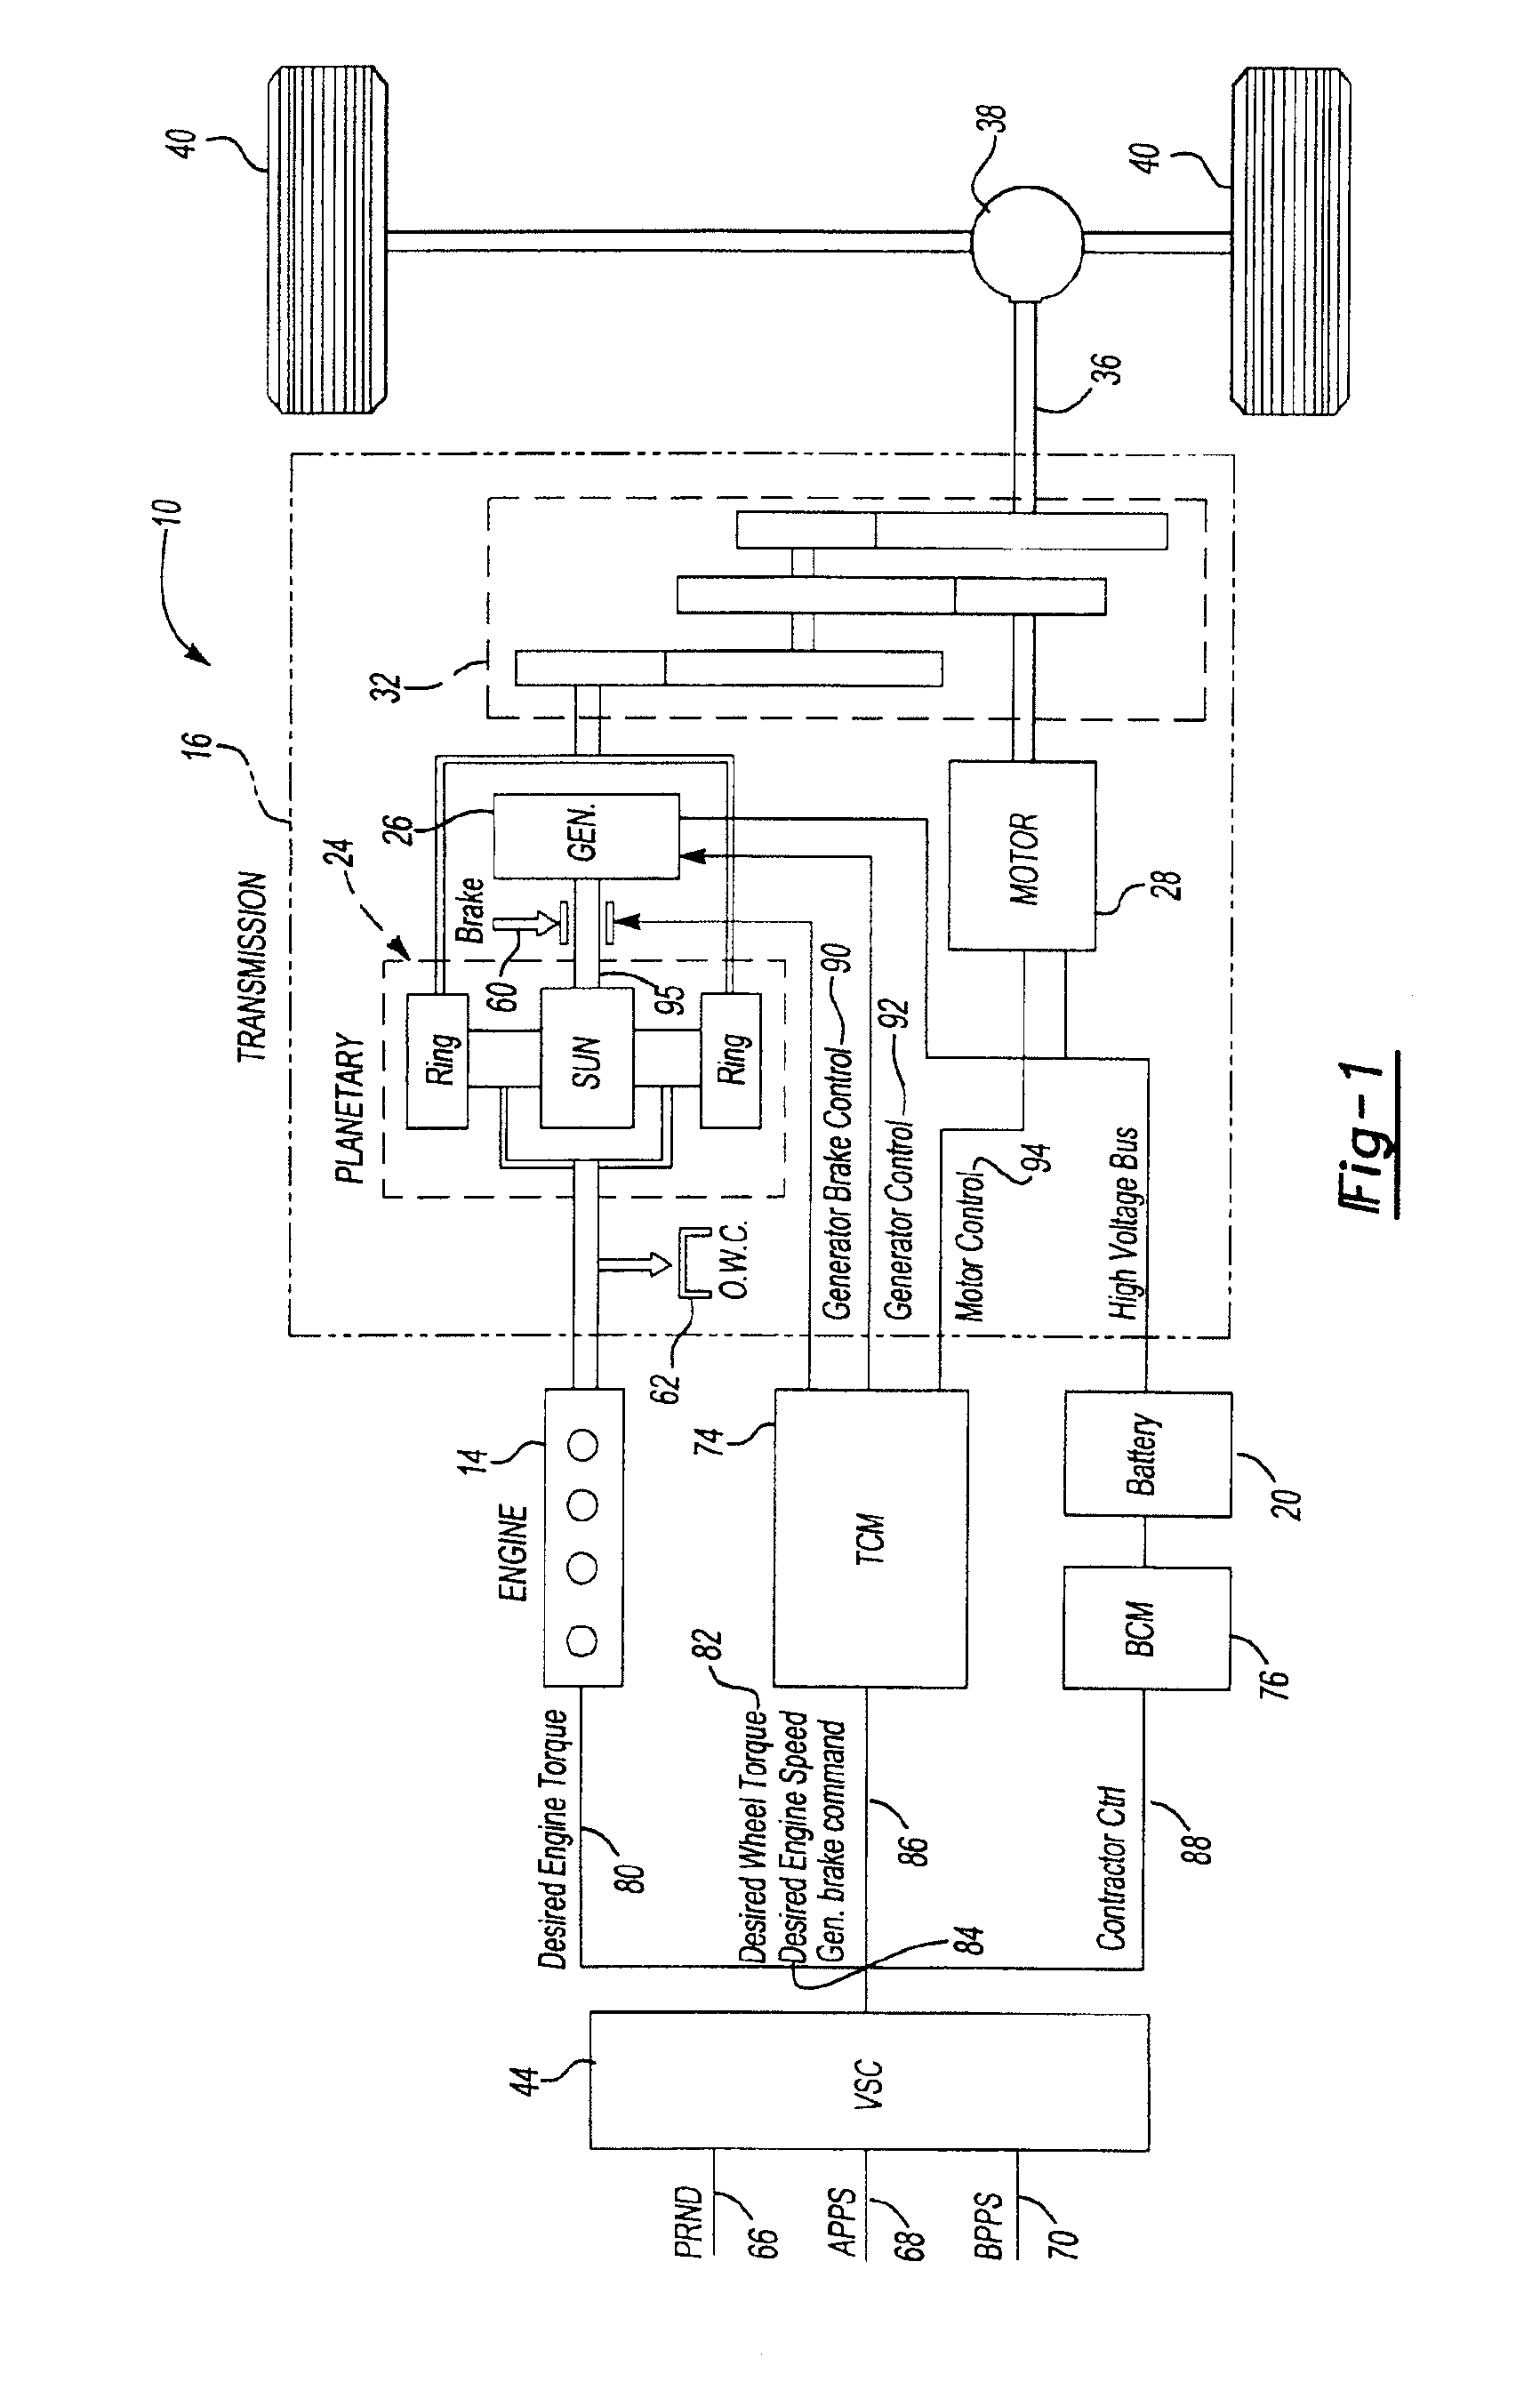 Method of operating a hybrid electric vehicle to limit noise, vibration, and harshness